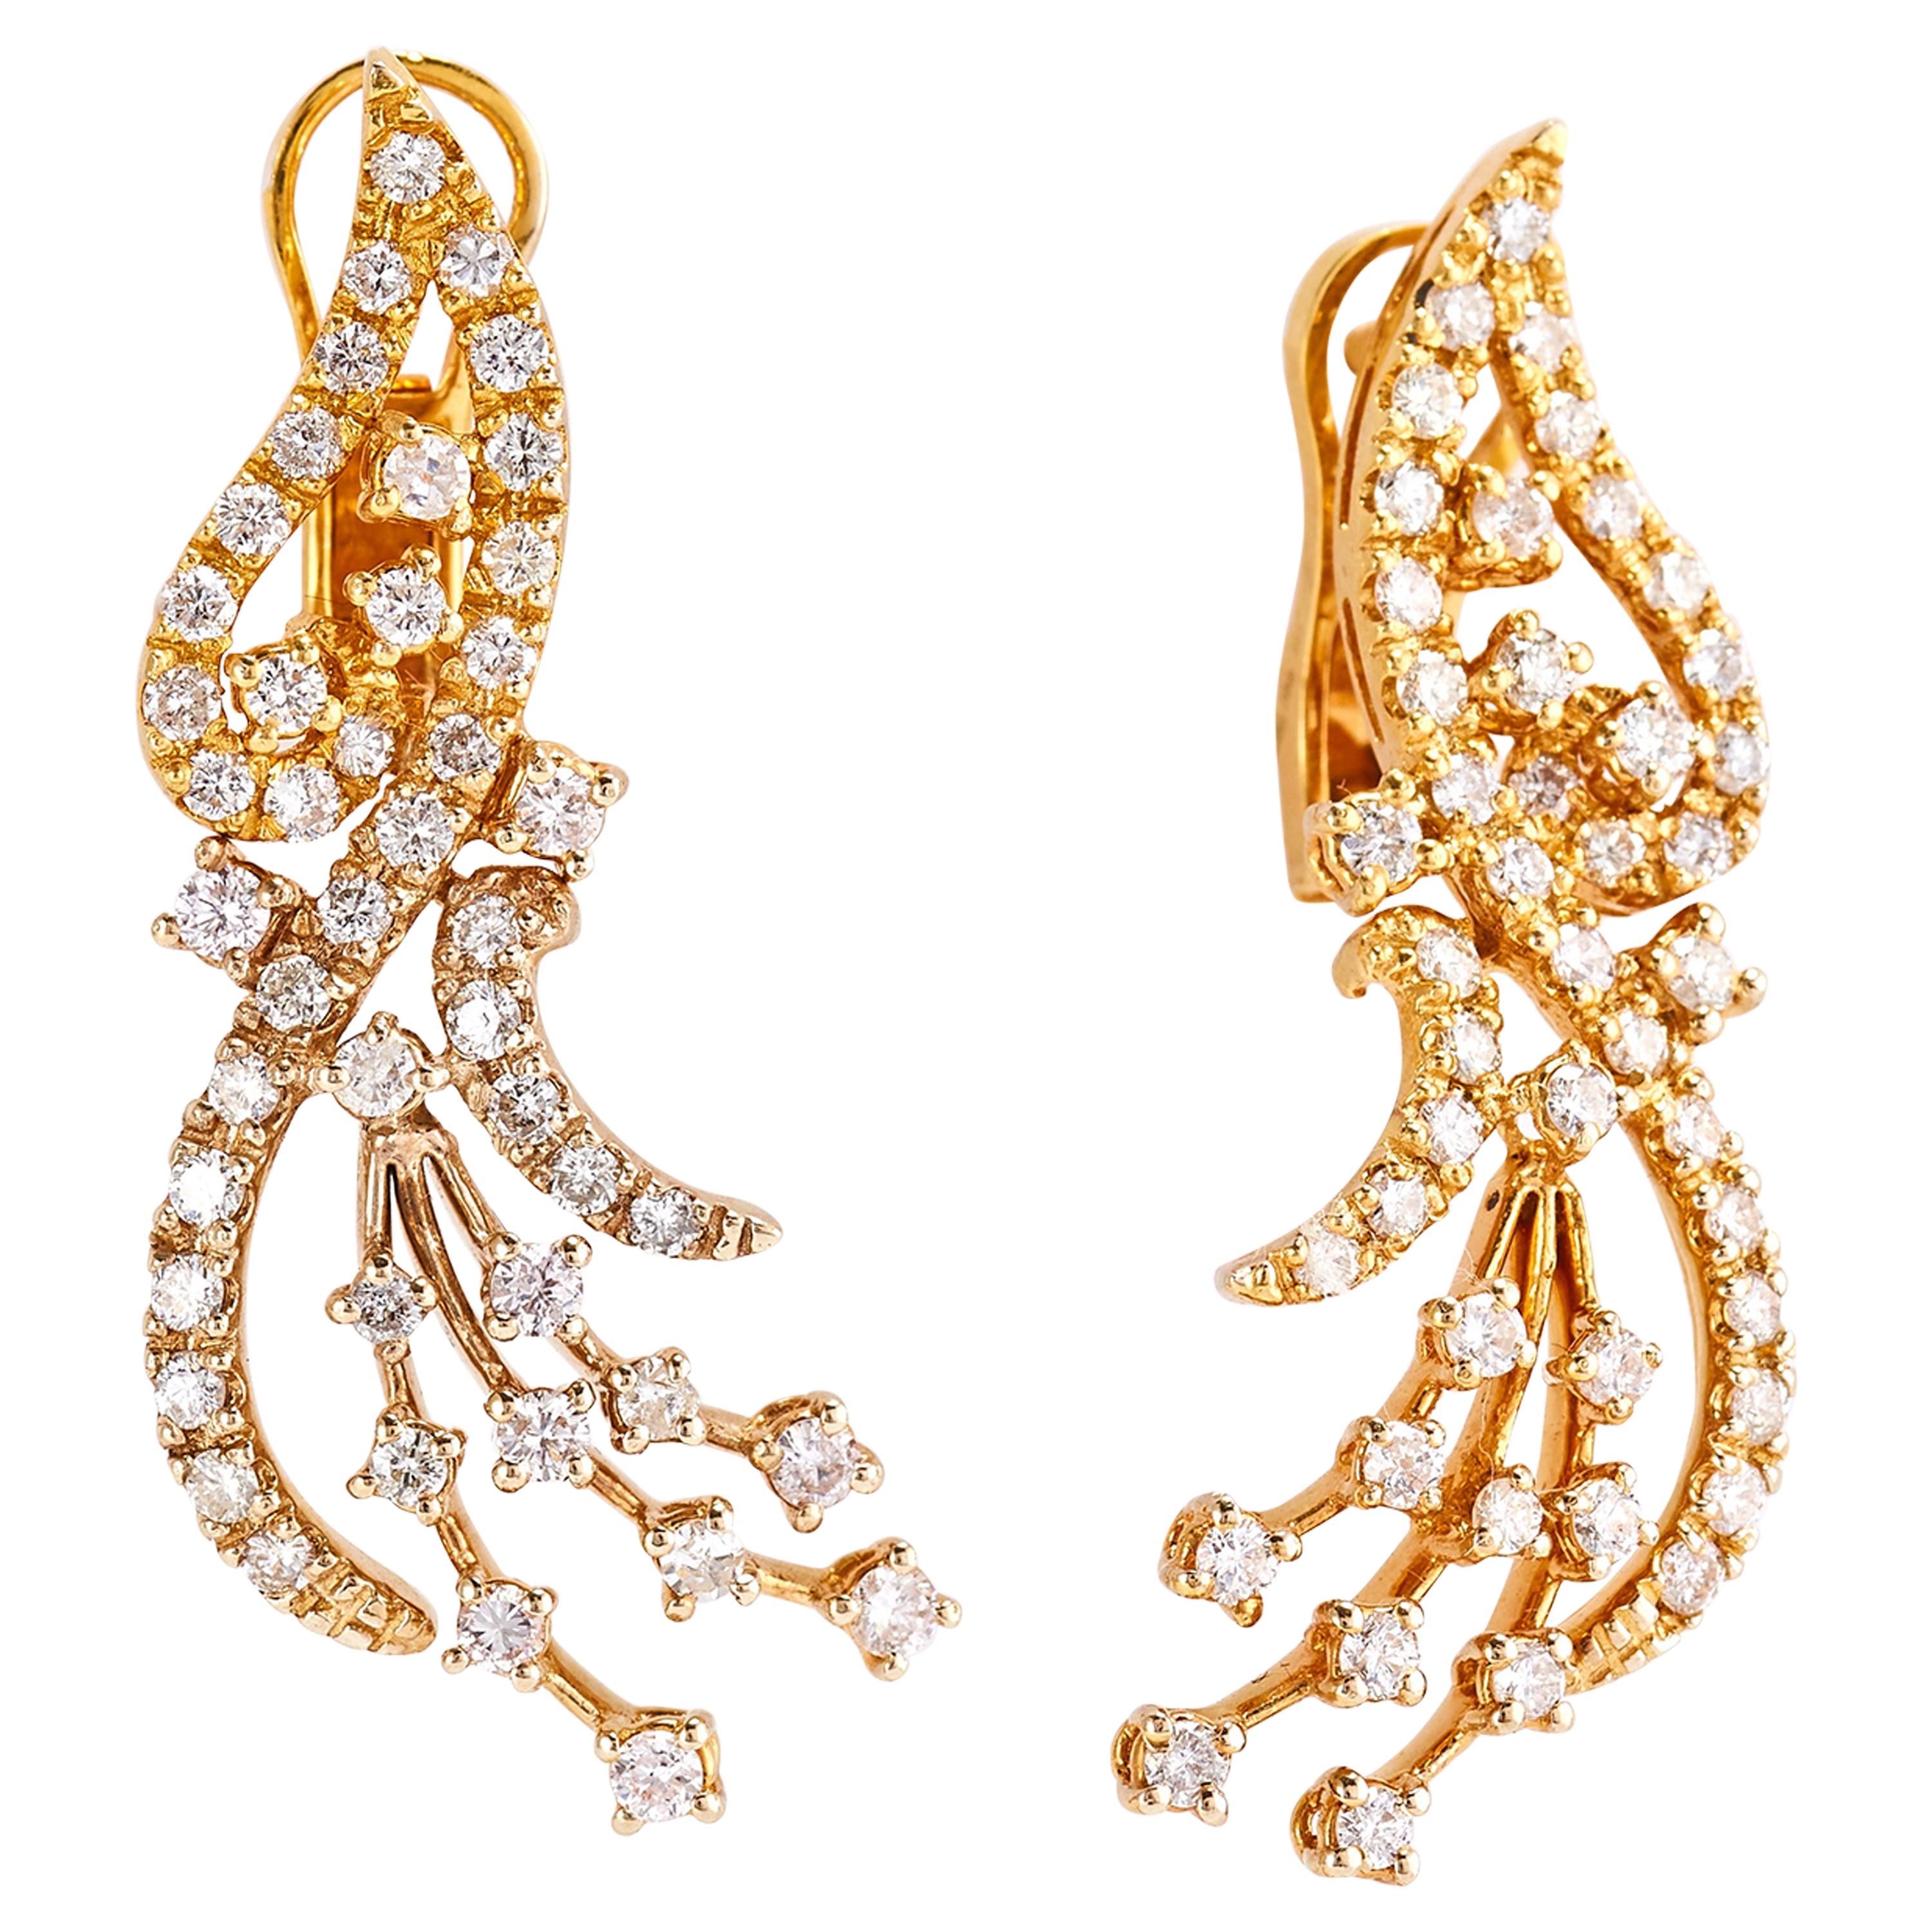 Pair of Glorious 18 Karat Yellow Gold Earrings with 2.70 Carat of Diamonds For Sale